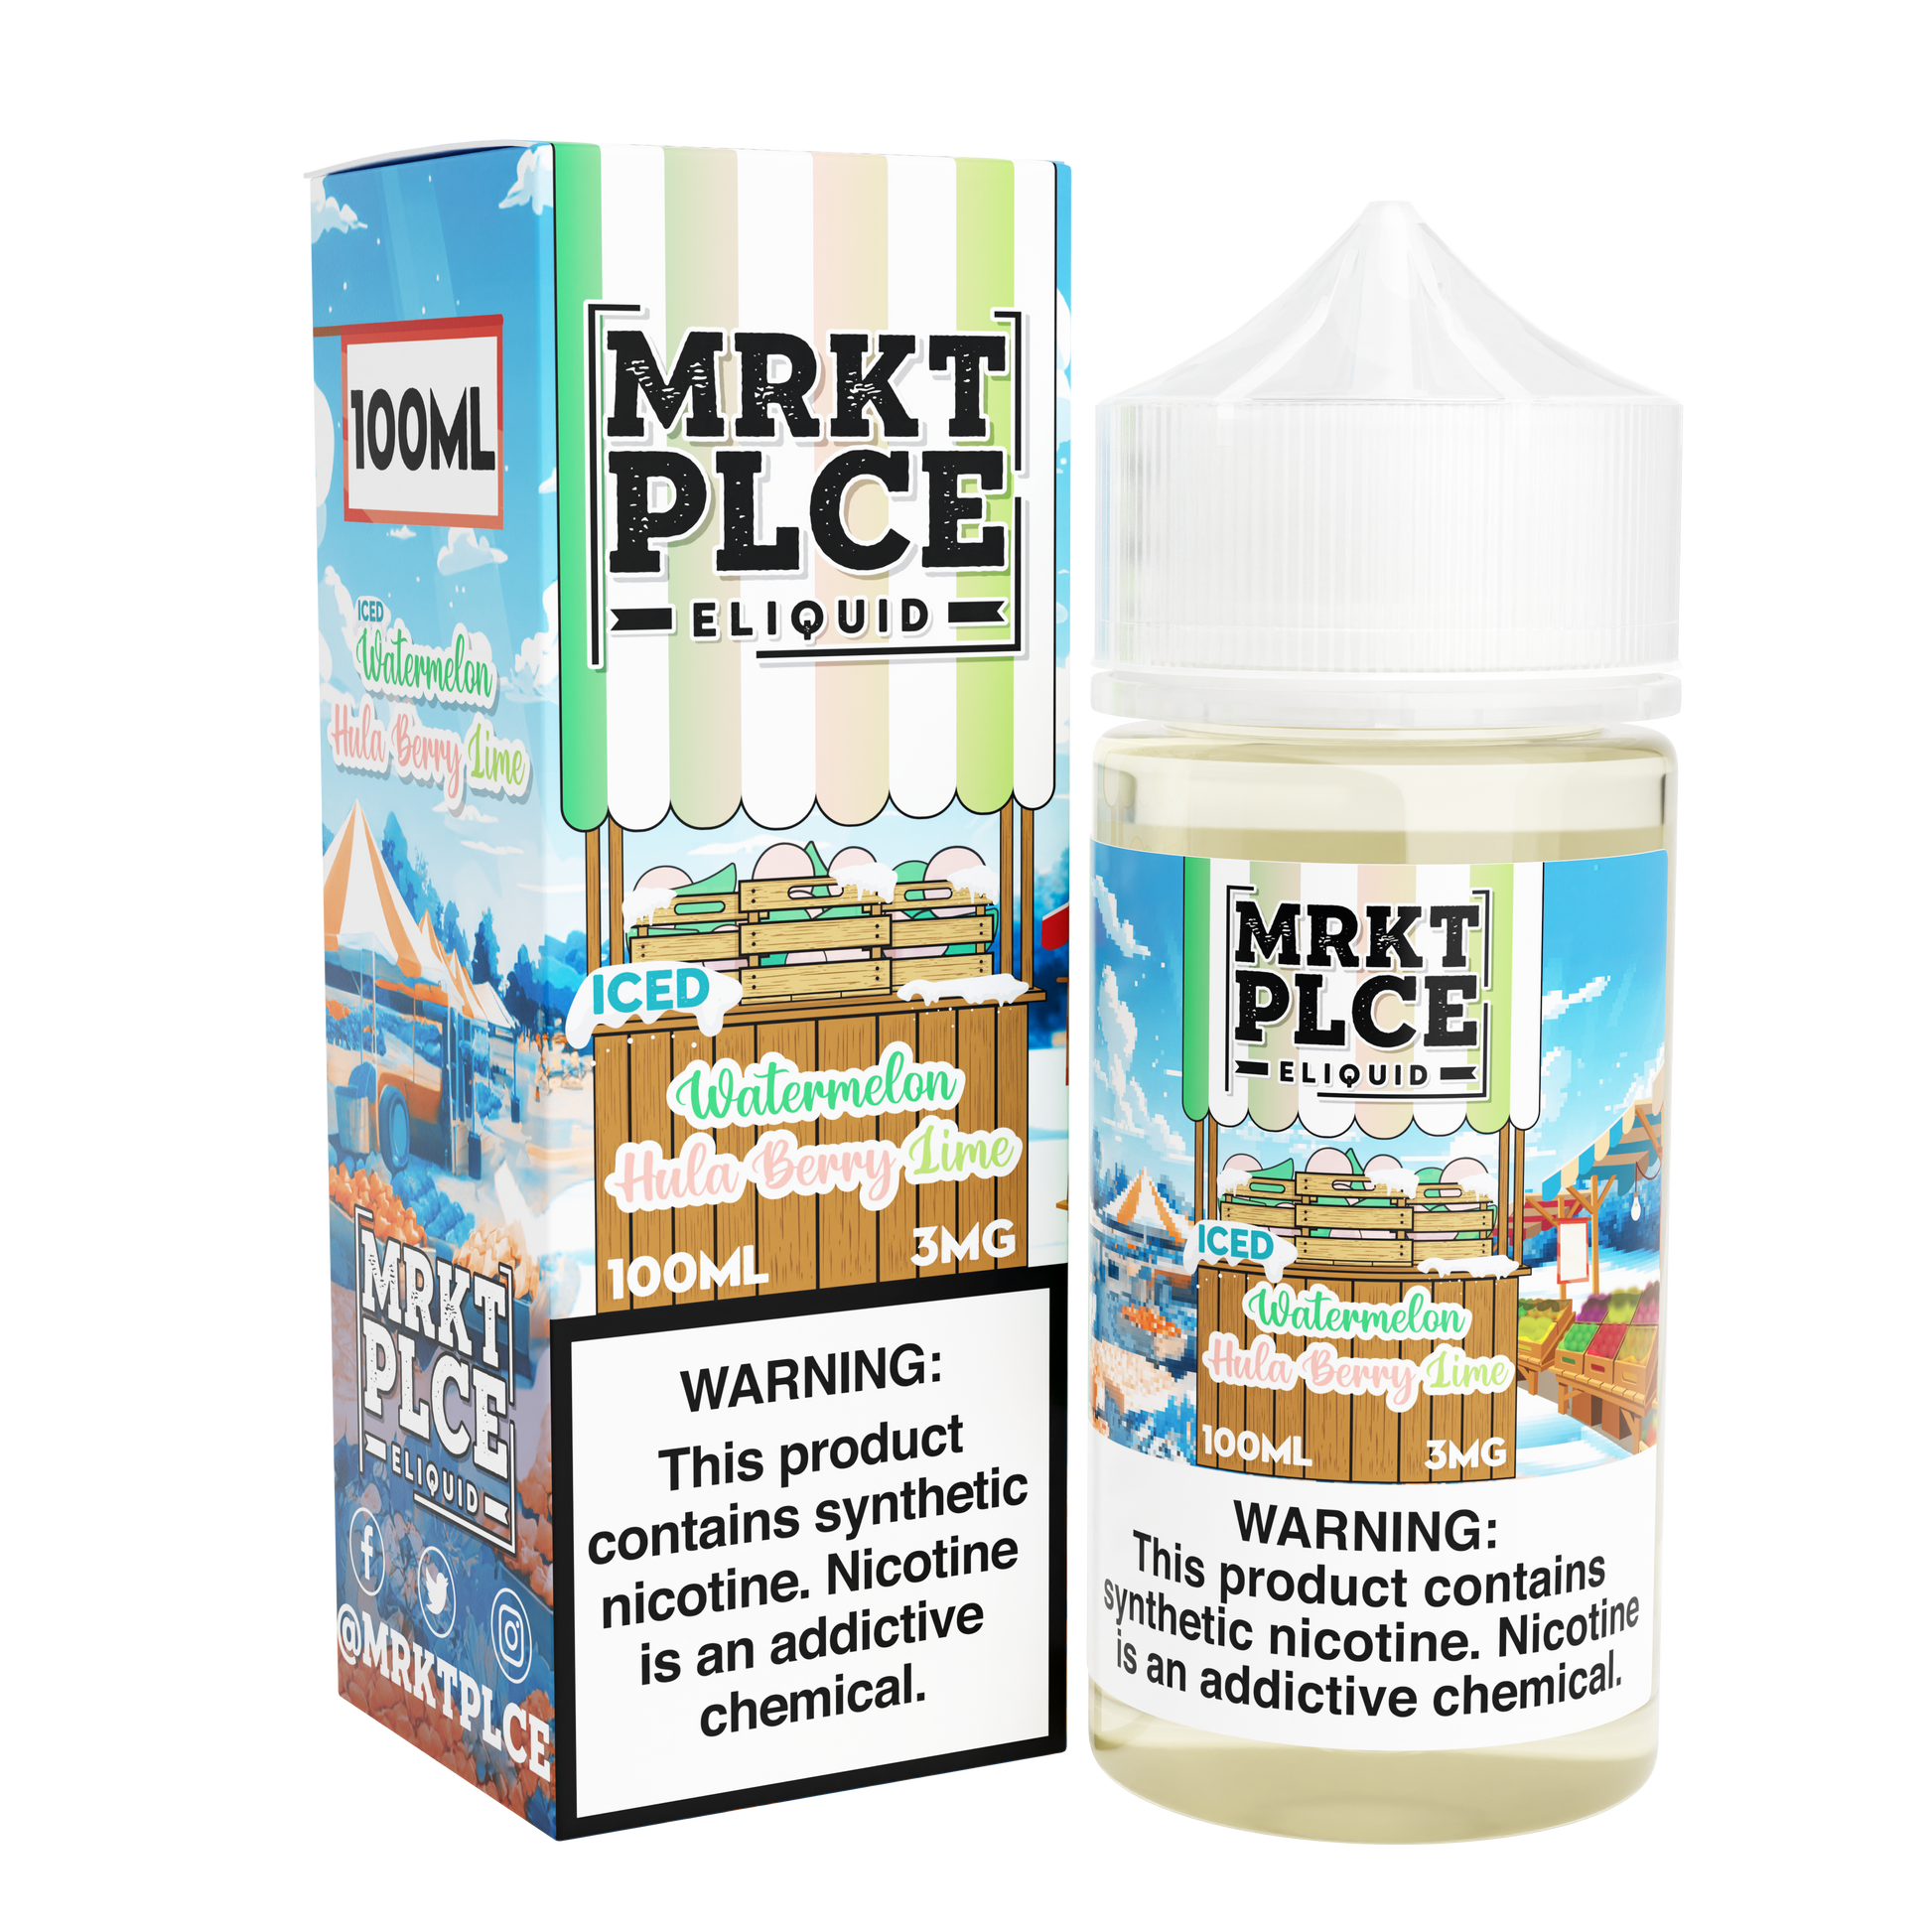 MRKT PLCE Series E-Liquid 100mL (Freebase) | Watermelon Hulaberry Lime Iced with packaging